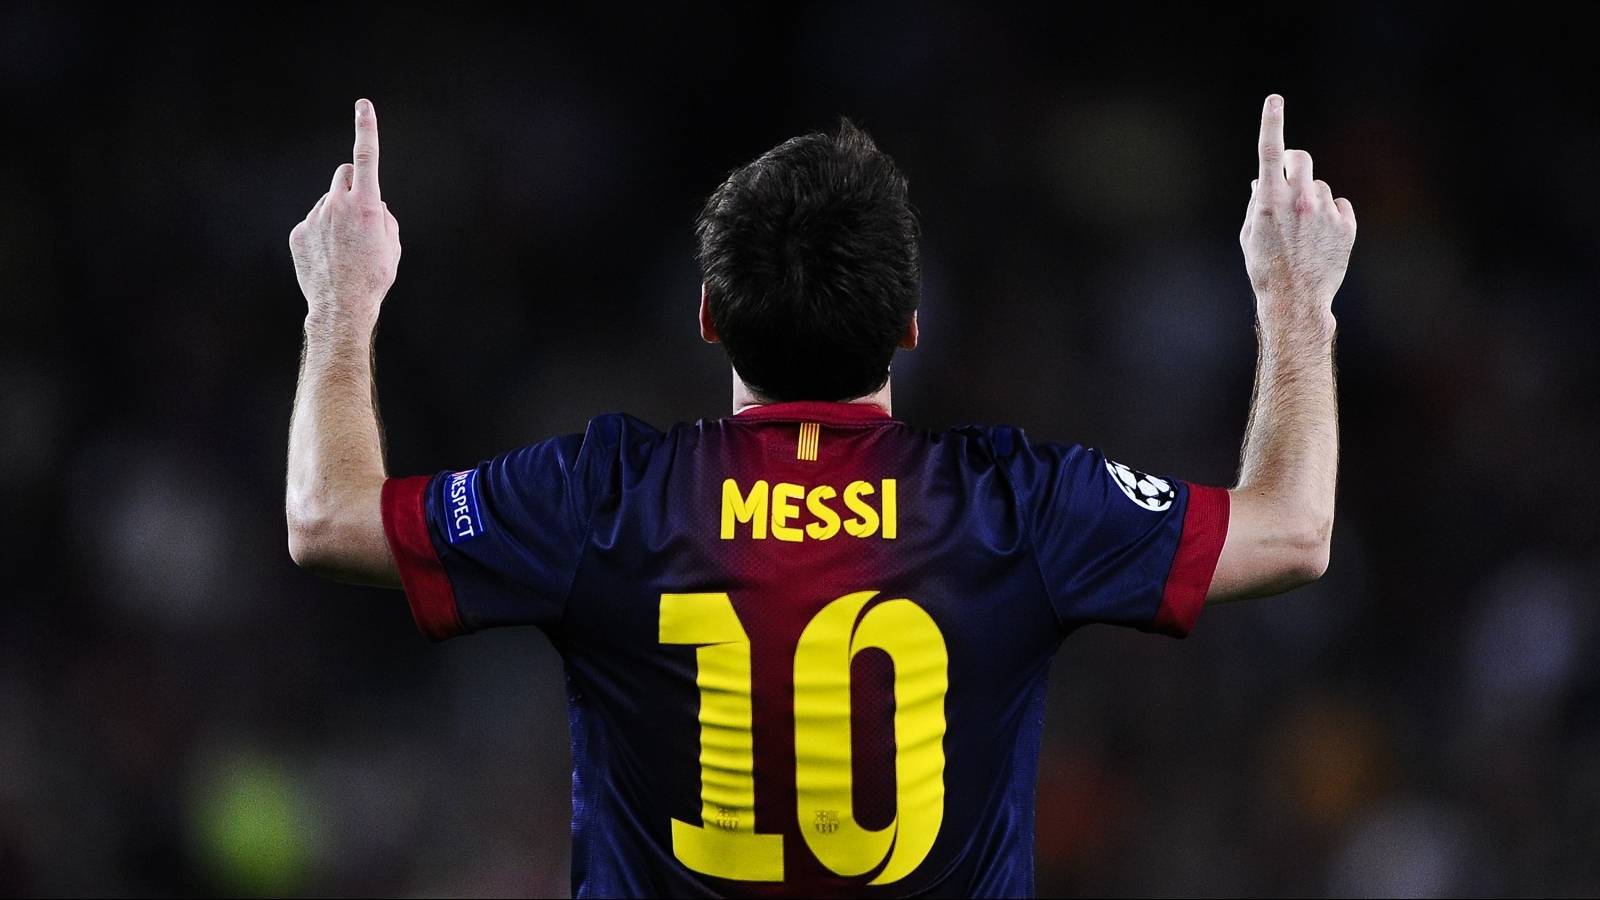 lionel andres messi, people, sports, men, football, black cellphone